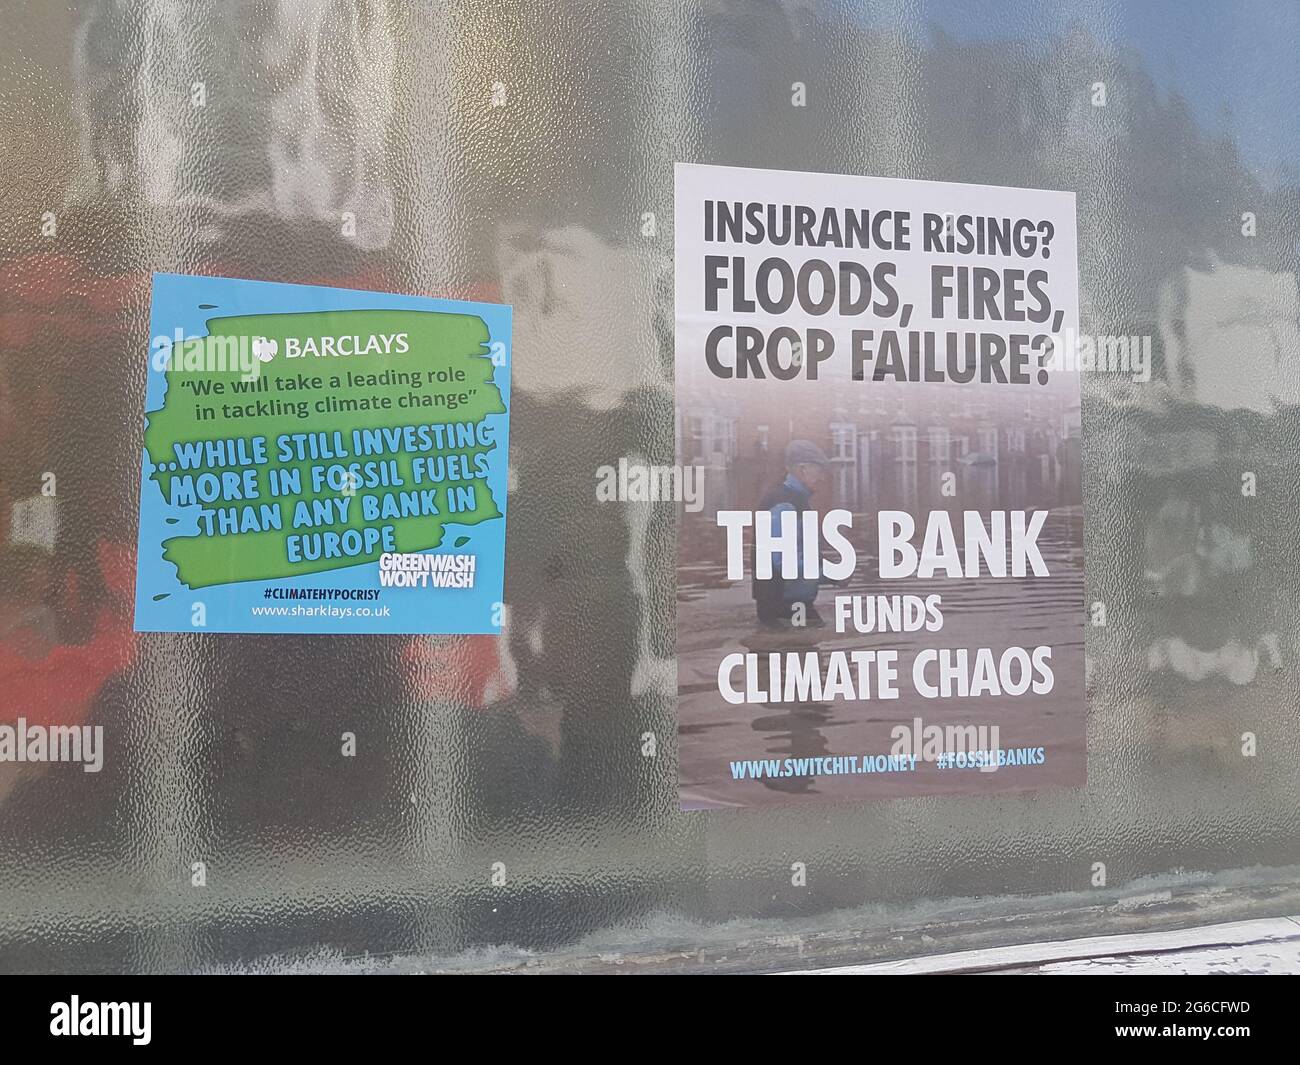 Woodbridge, Suffolk, UK July 05 2021: Extinction rebellion poster that has been put up on the walls of a HSBC bank claiming they fund climate crisis Stock Photo